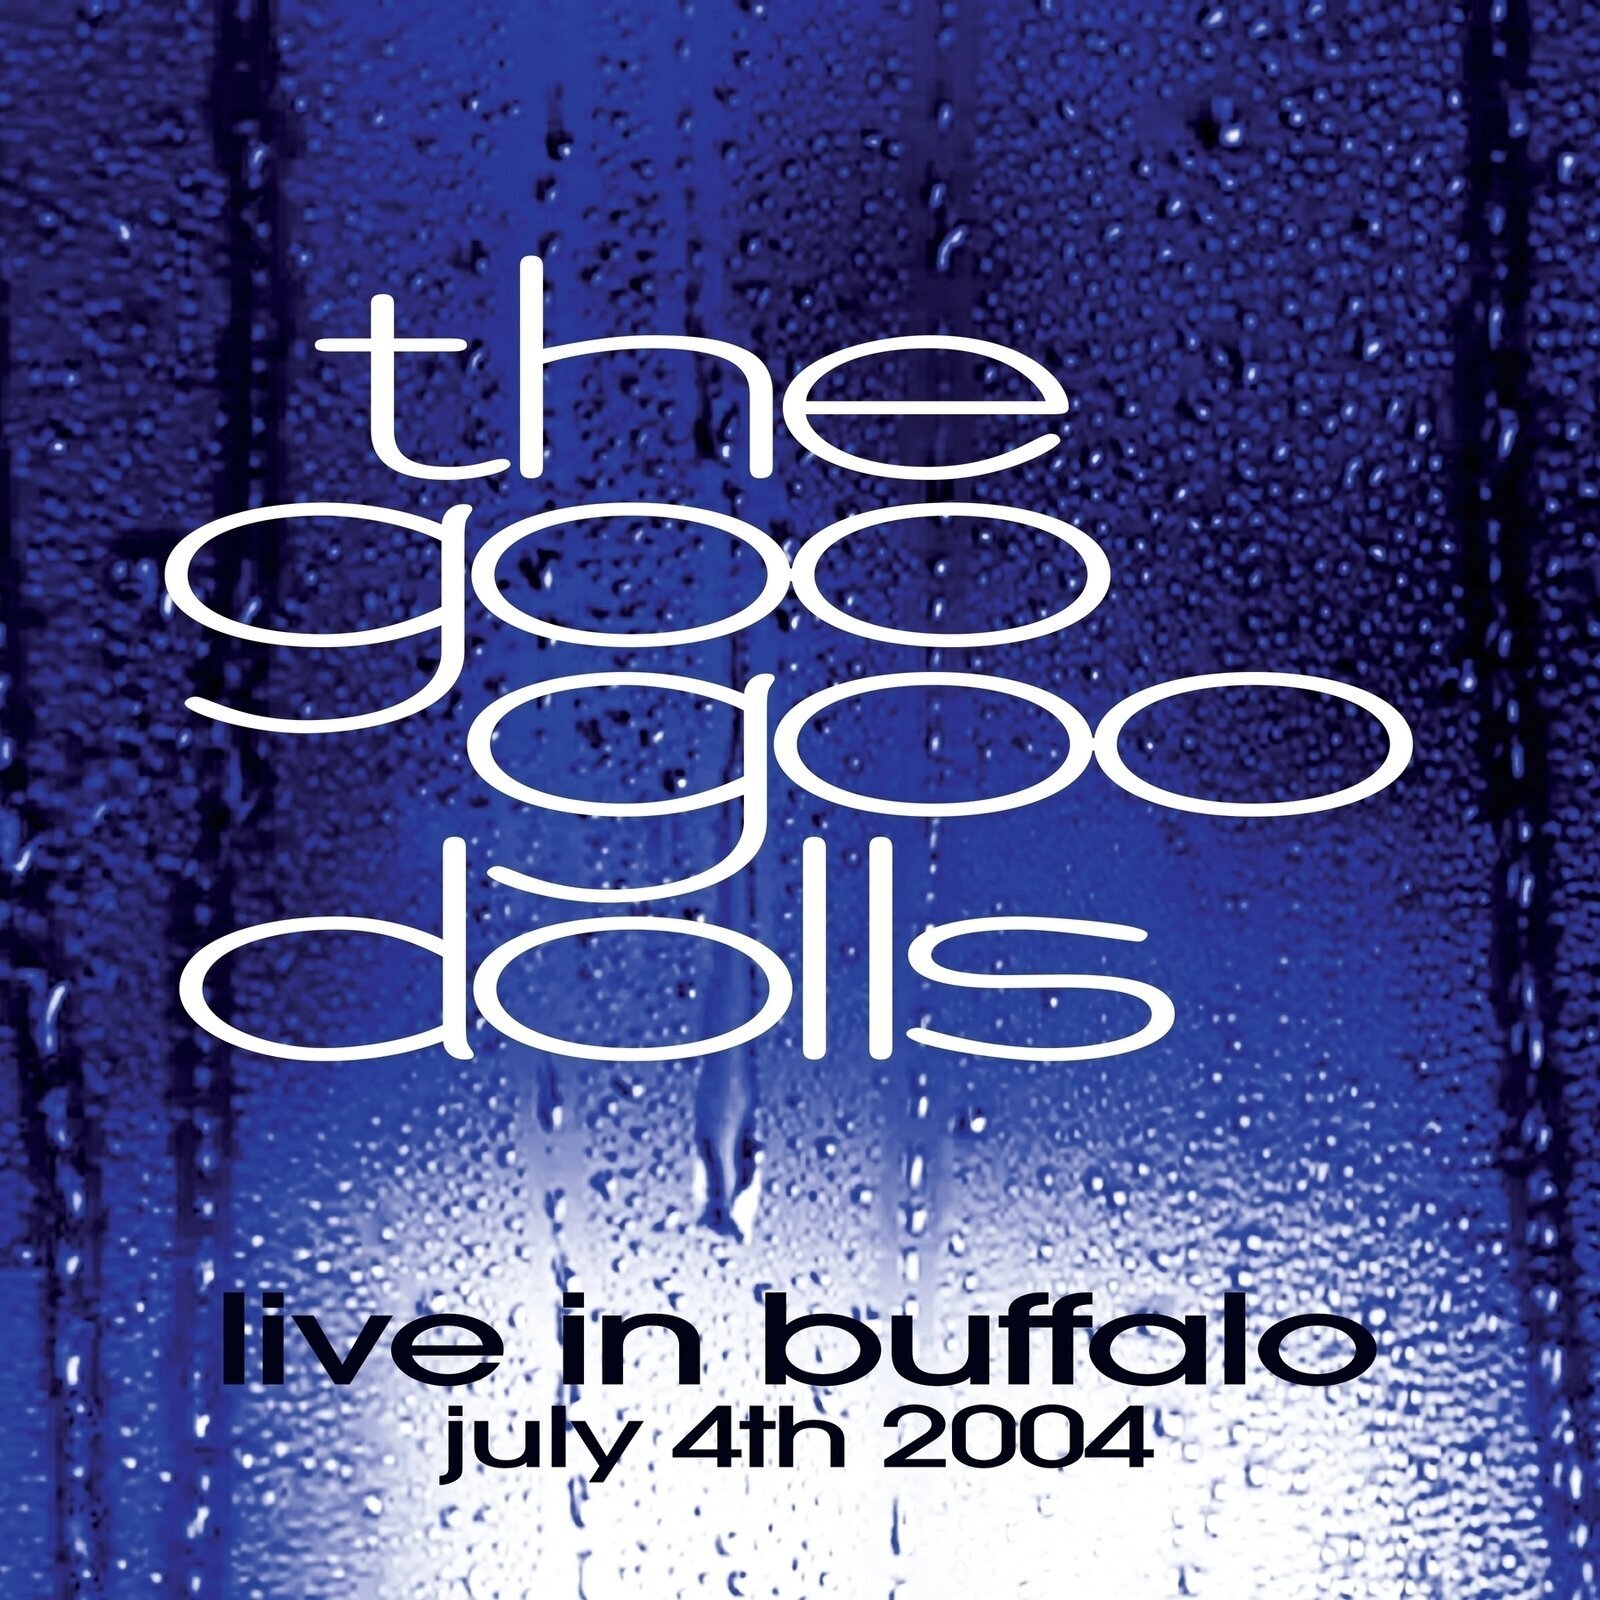 Vinyl Record Goo Goo Dolls - Live In Buffalo July 4th 2004 (Limited Edition) (Clear Coloured) (2 LP)